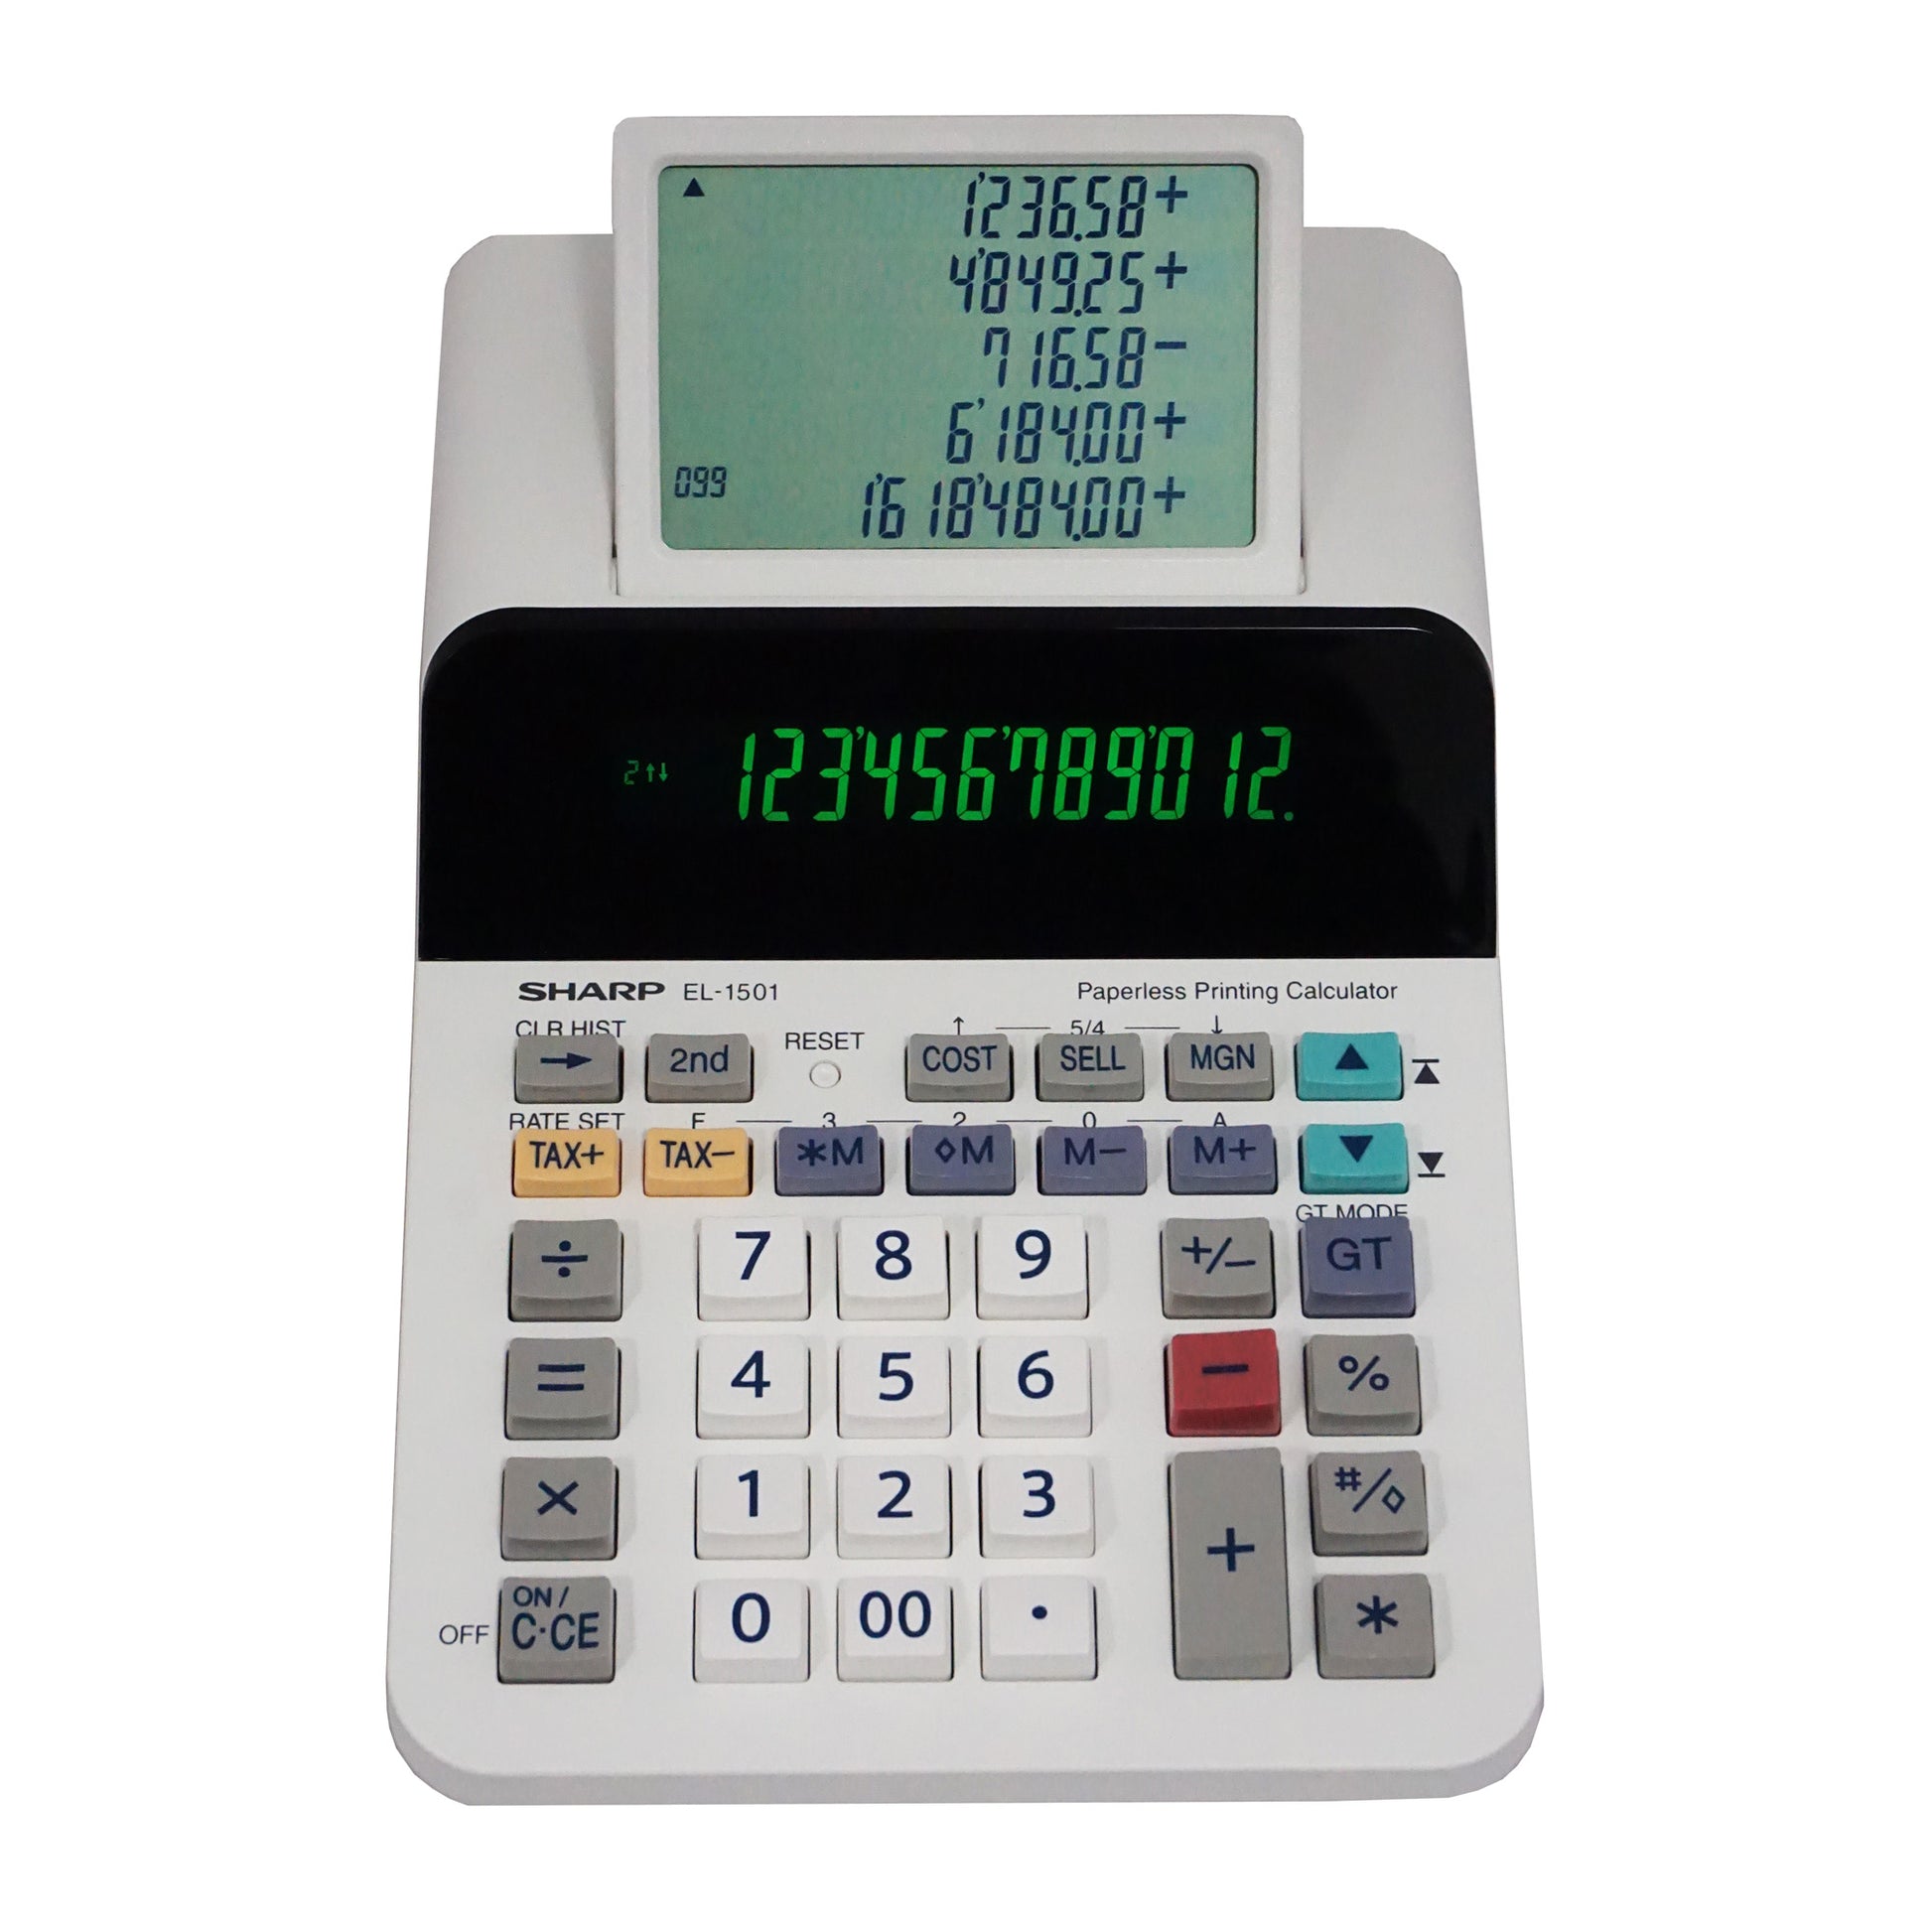 compact size printing calculator with scrolling digital display instead of printed paper roll